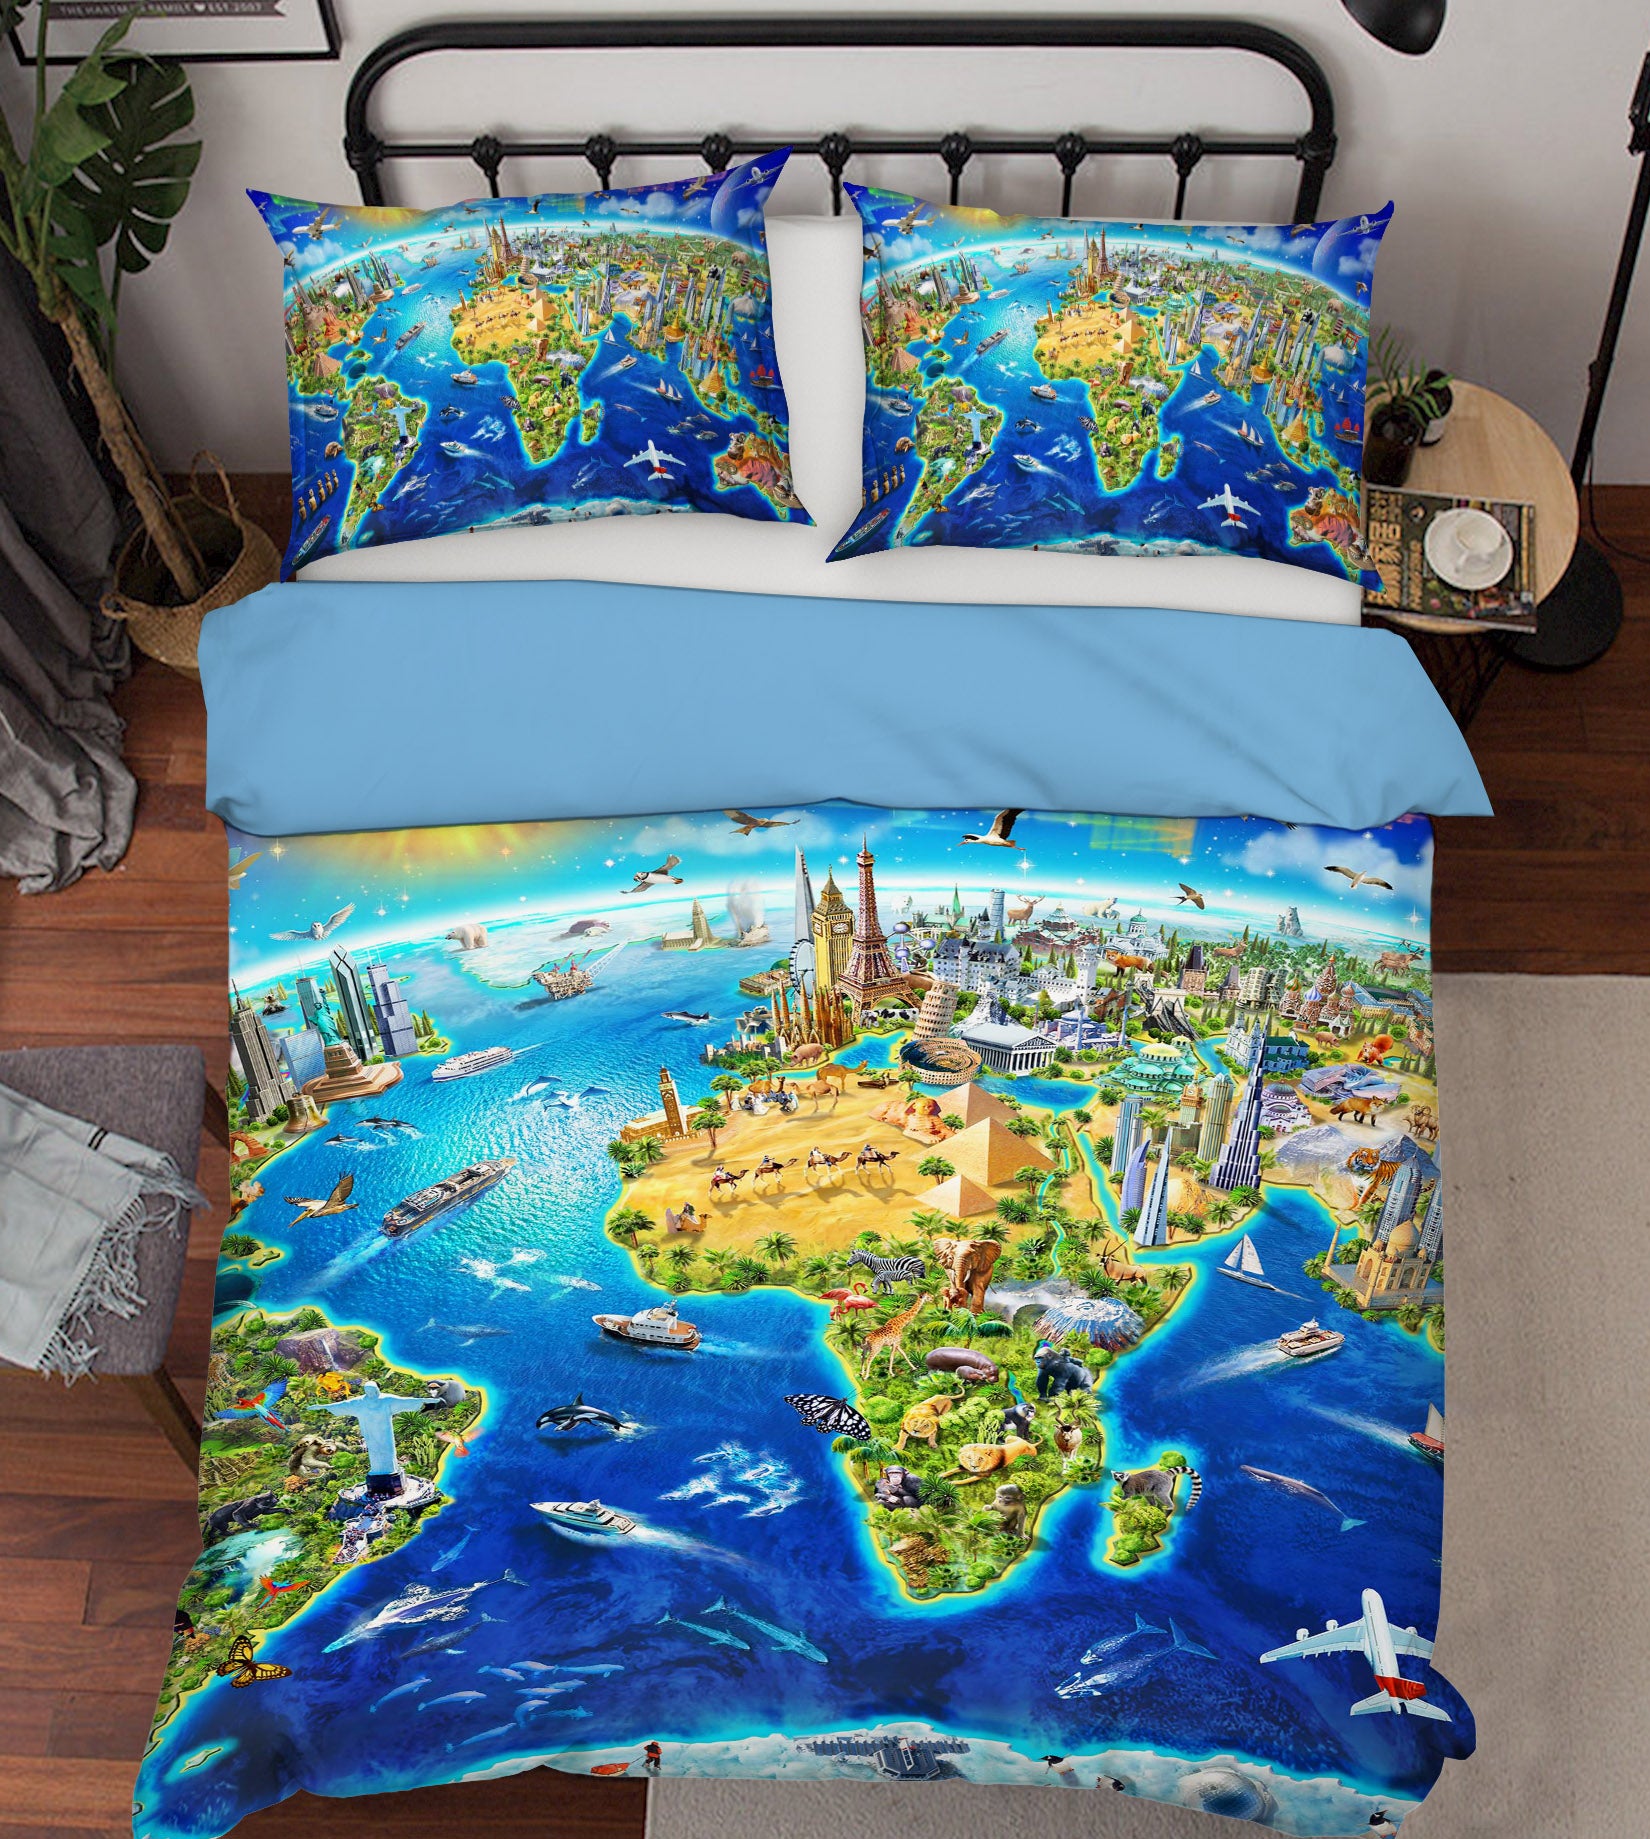 3D Earth Oasis 2046 Adrian Chesterman Bedding Bed Pillowcases Quilt